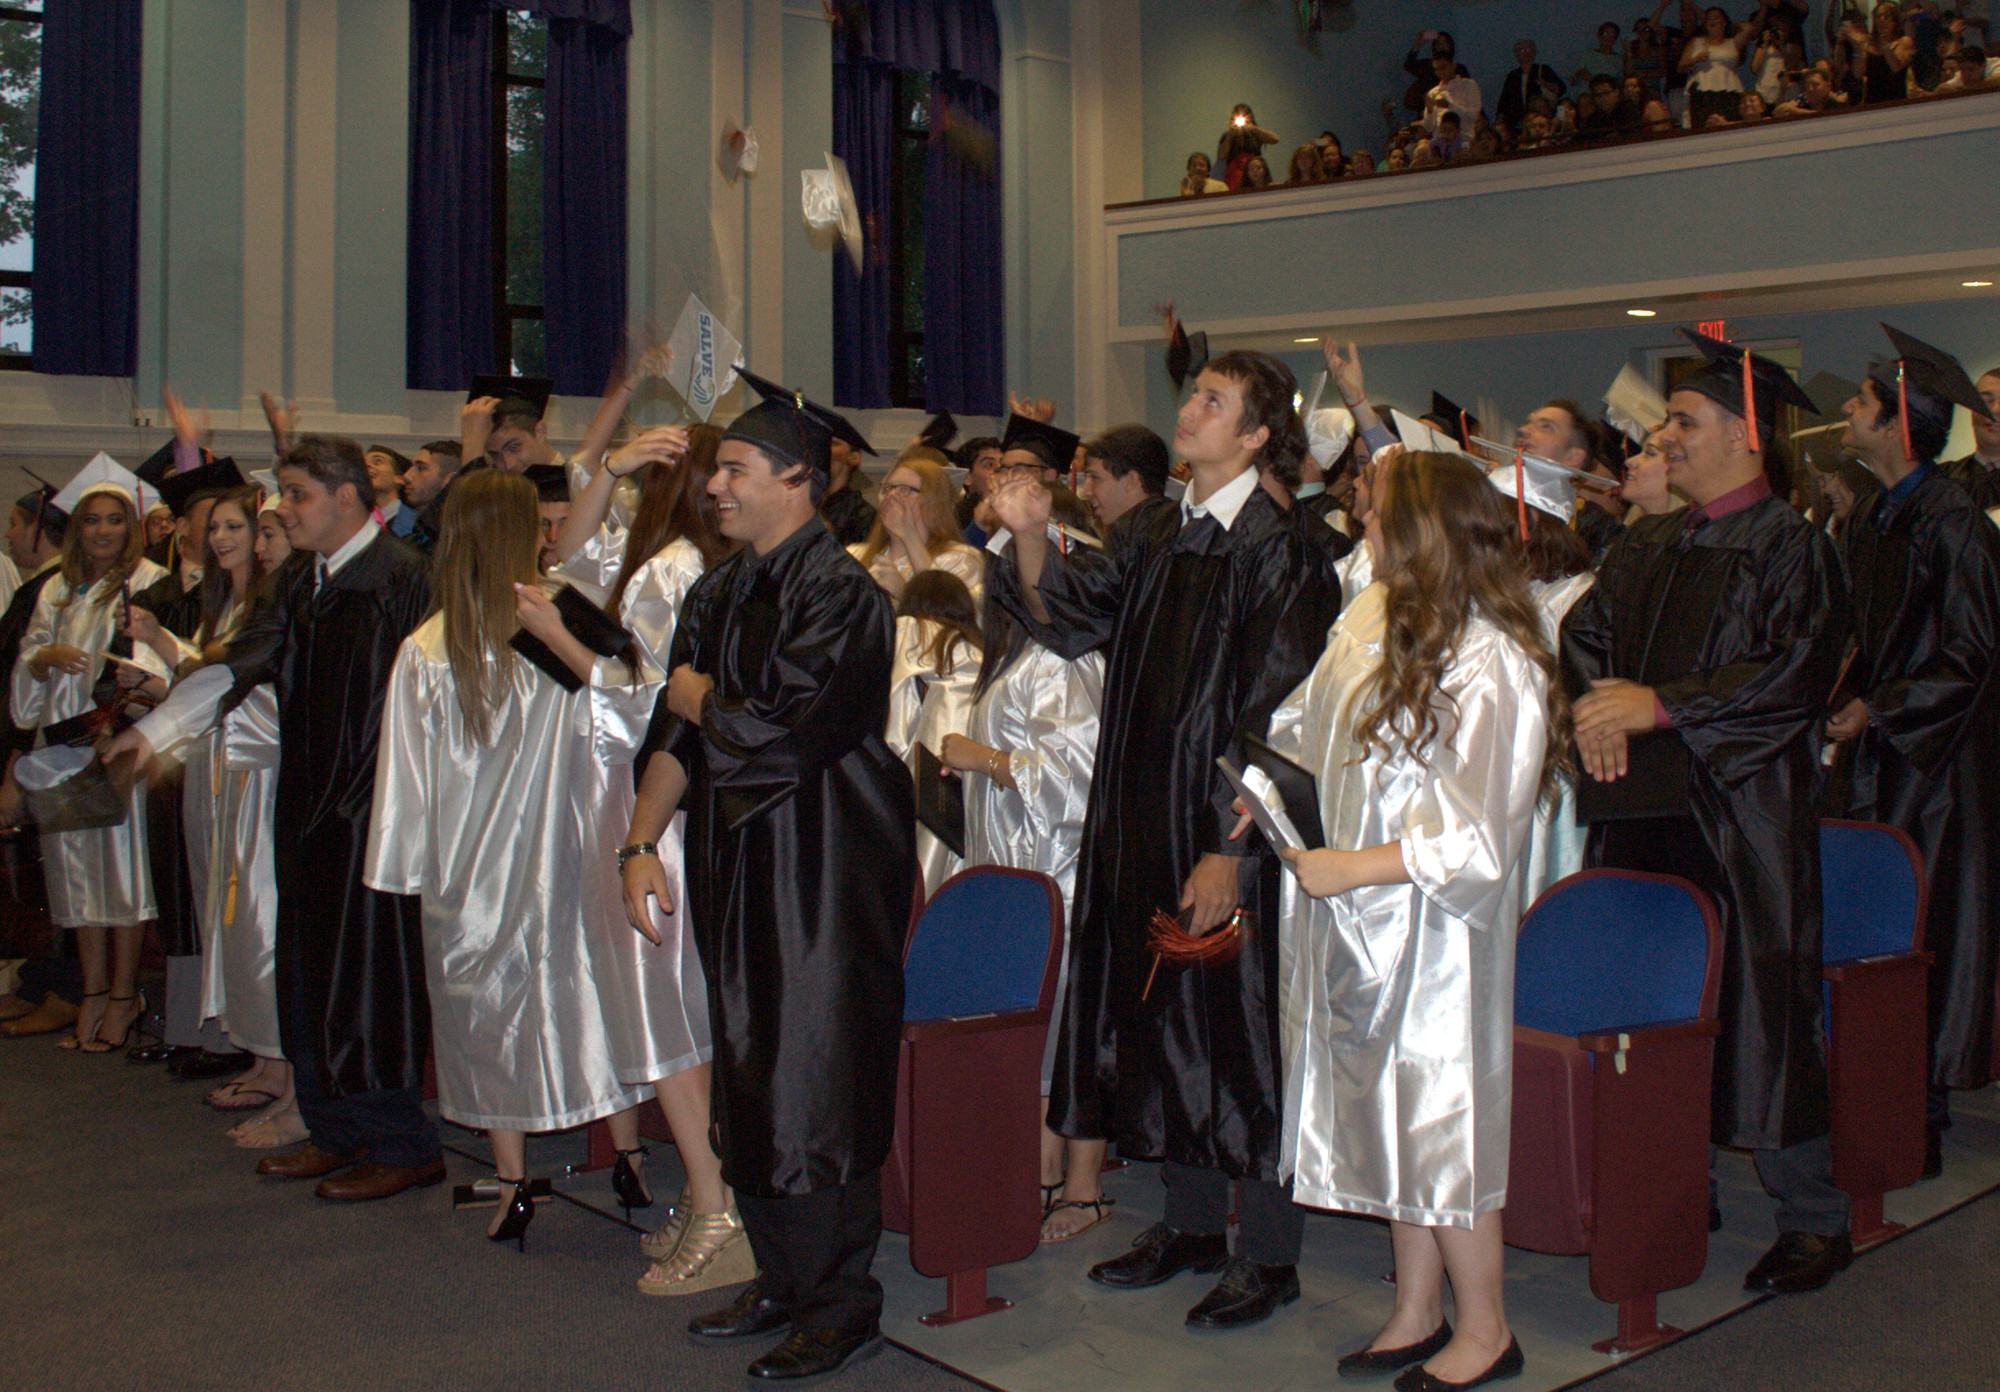 The just-pronounced graduates tossed their caps in the air.